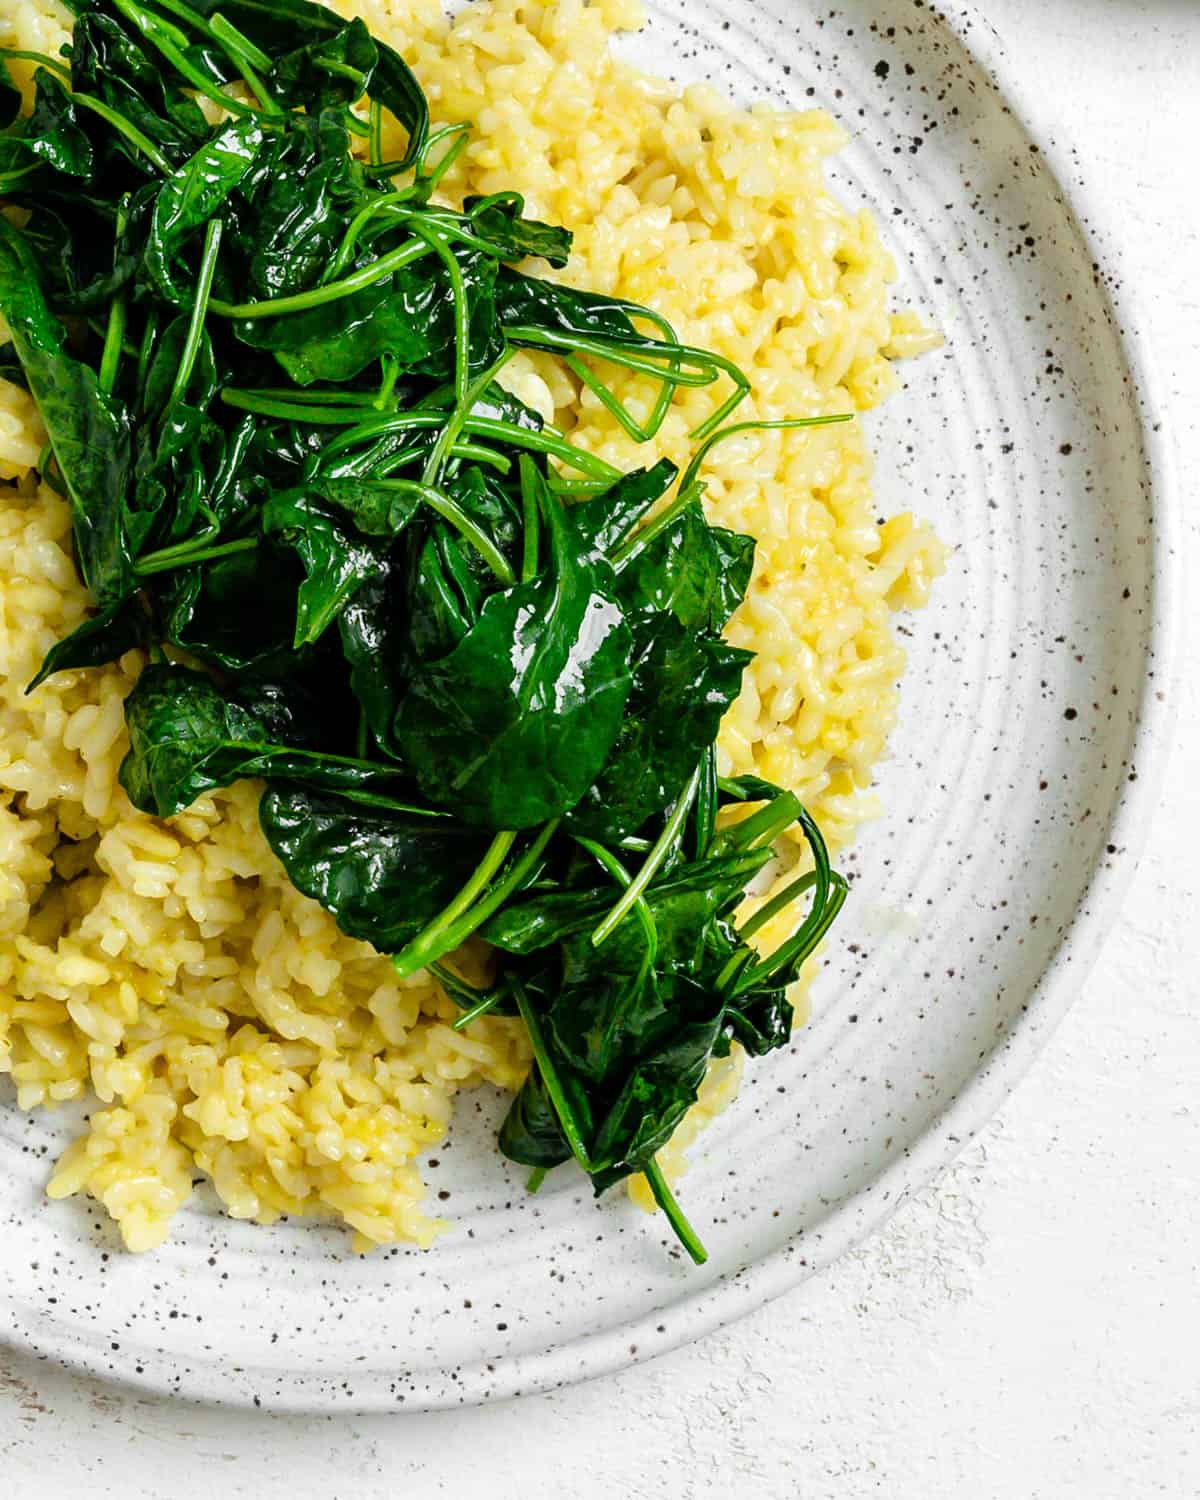 completed Slow Cooker Risotto with Kale plated on a white plate